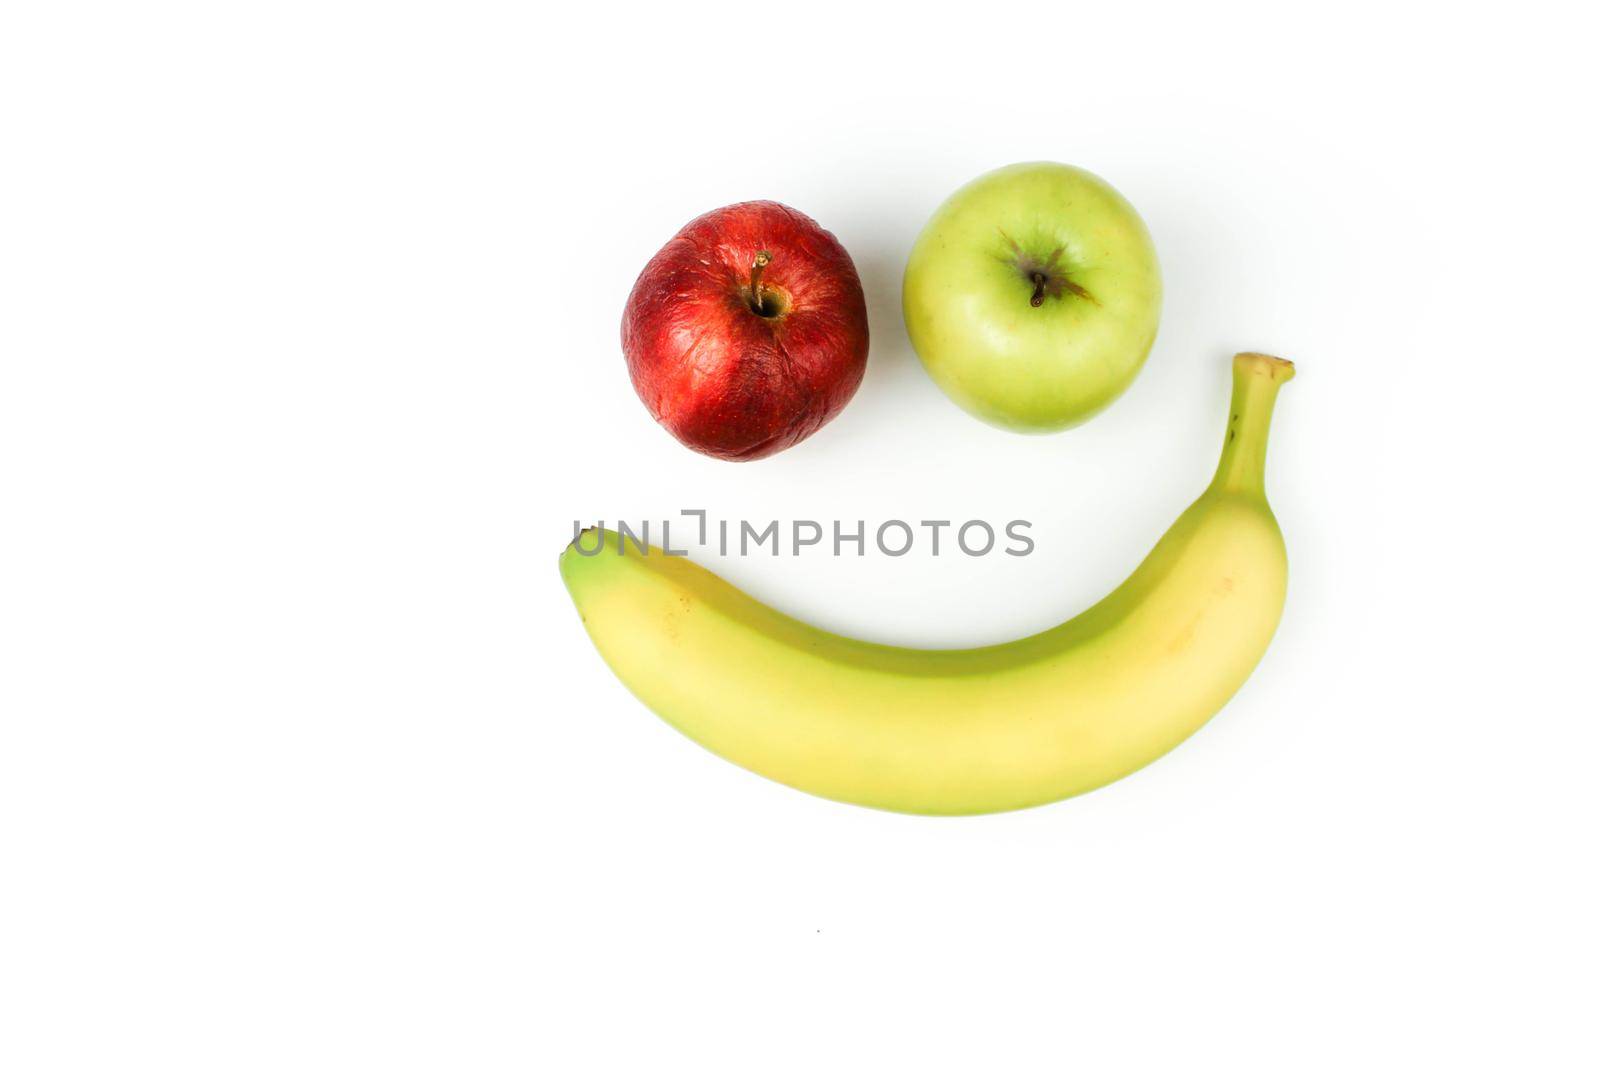 banana and apples smiley on white fashion background with space for text by JuliaDorian